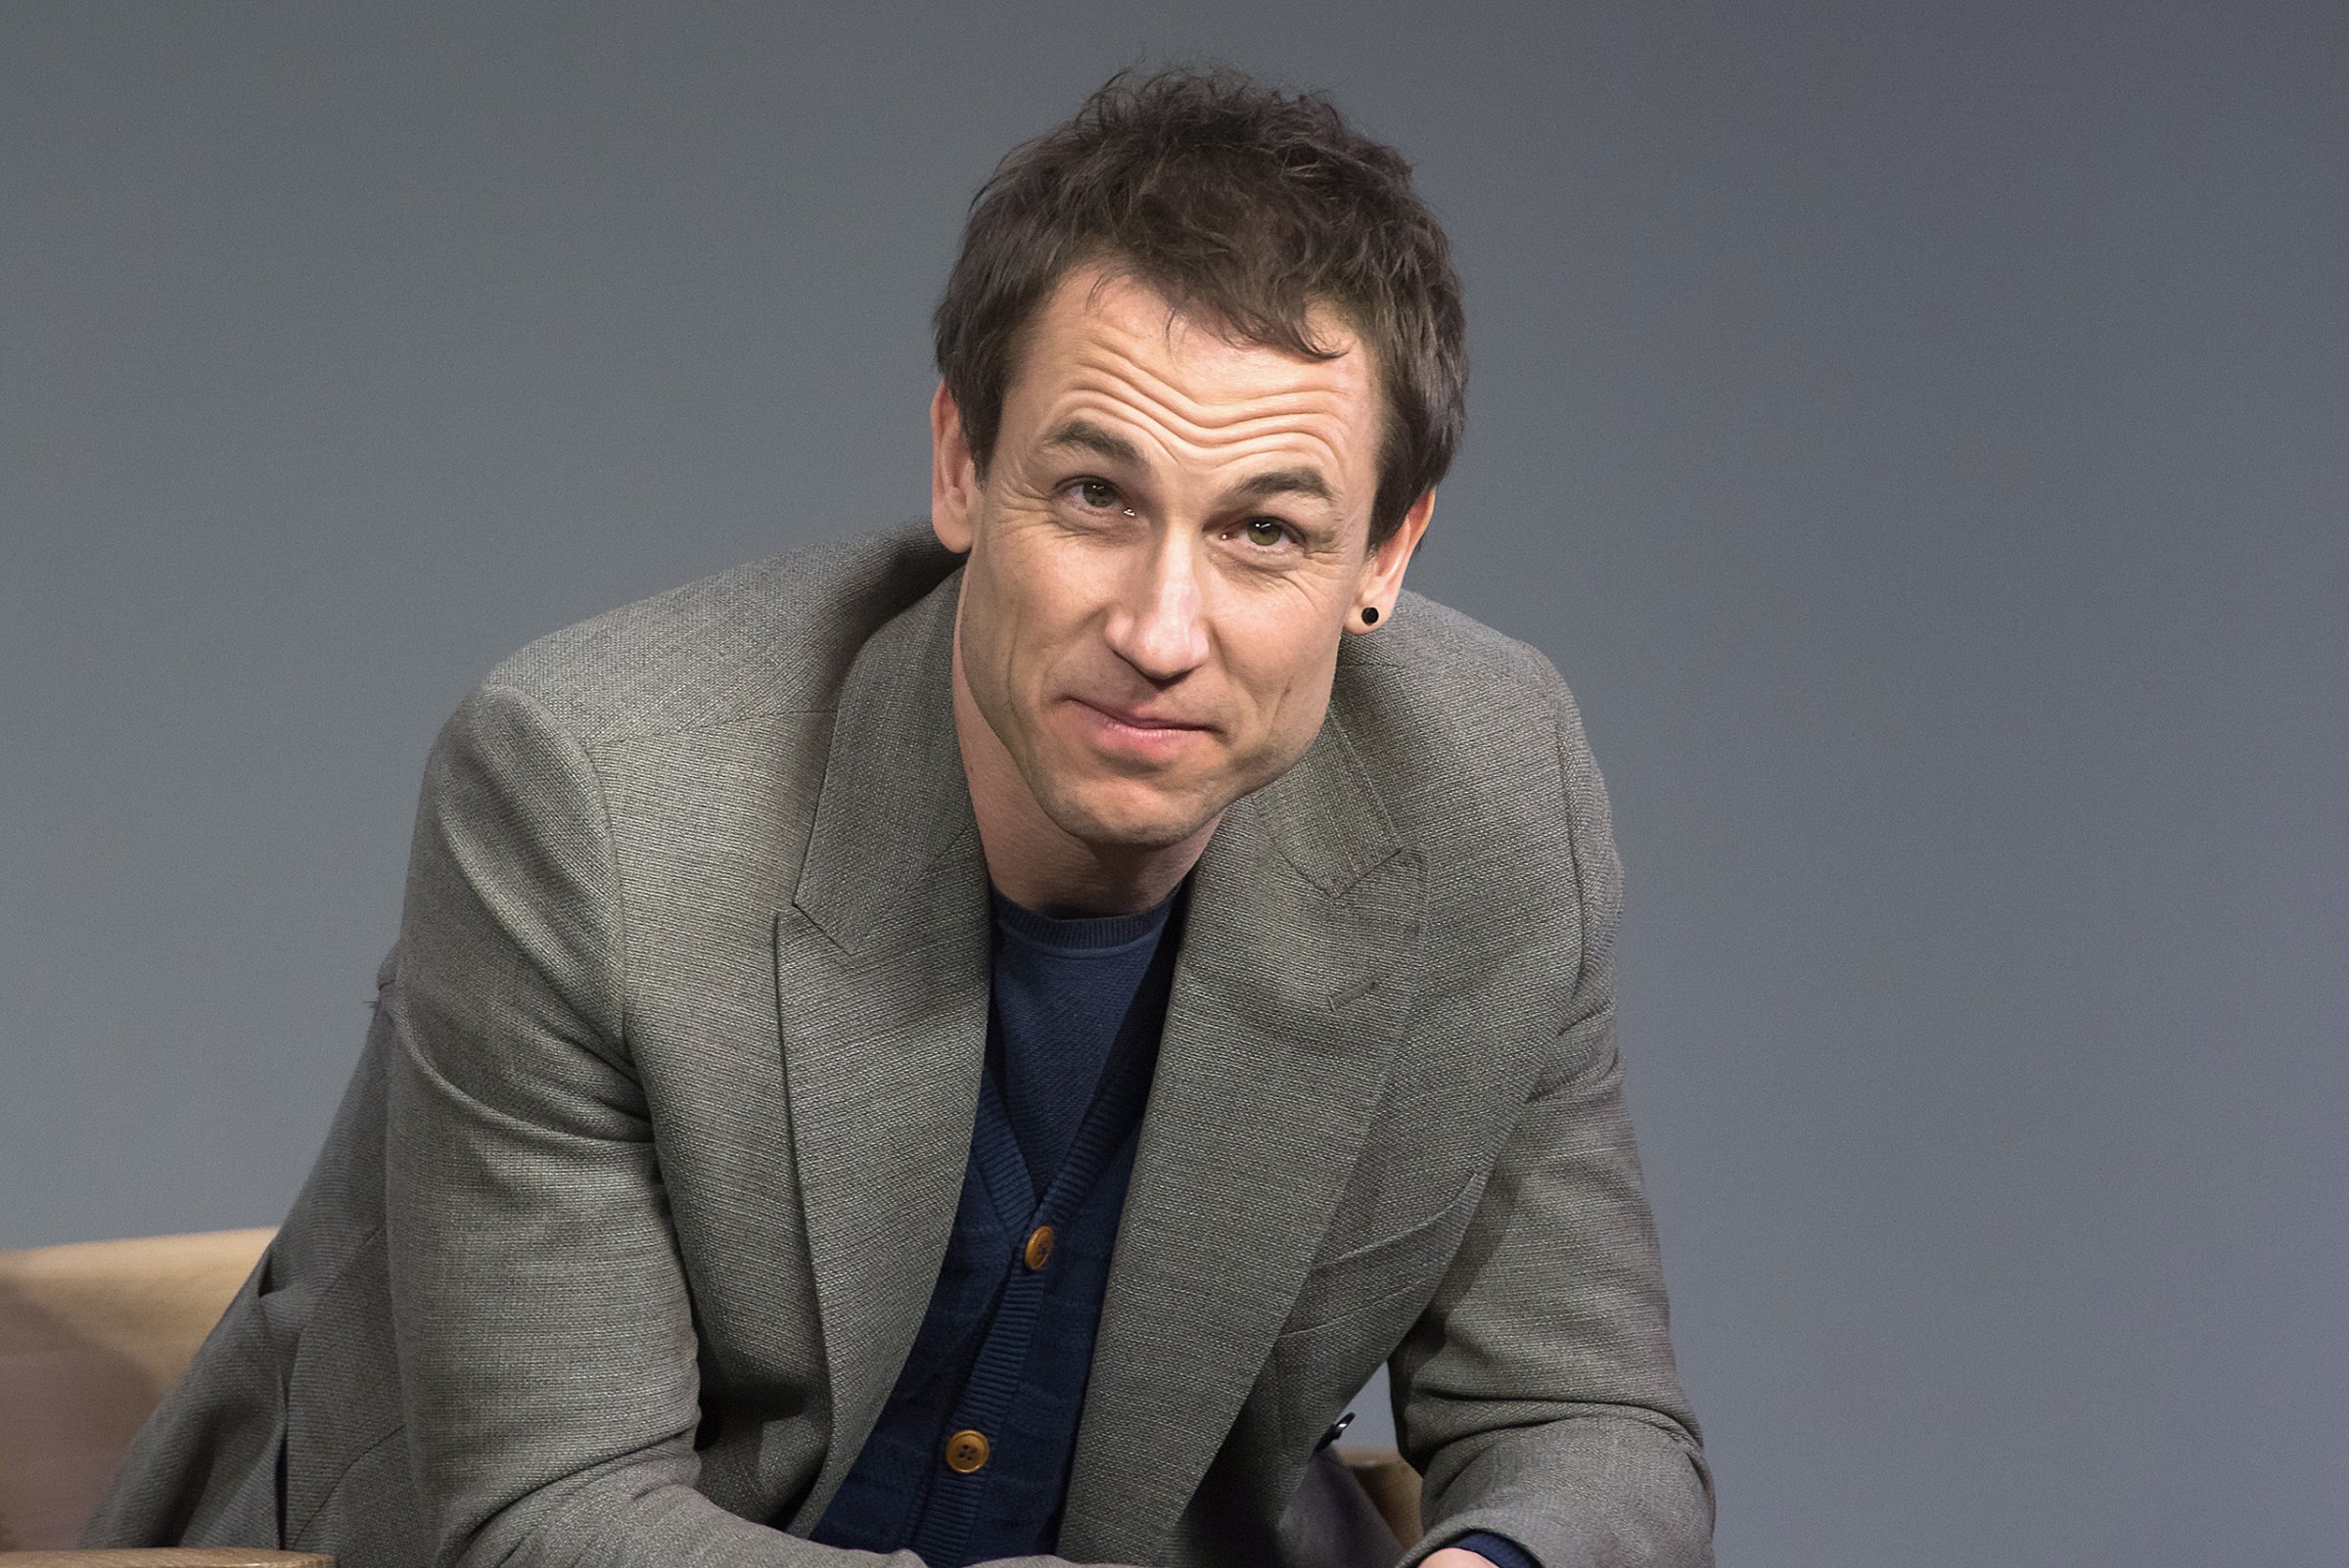 Tobias Menzies attends Apple Store Soho Presents Meet the Cast: "Outlander" at Apple Store Soho in New York City on April 6, 2016.